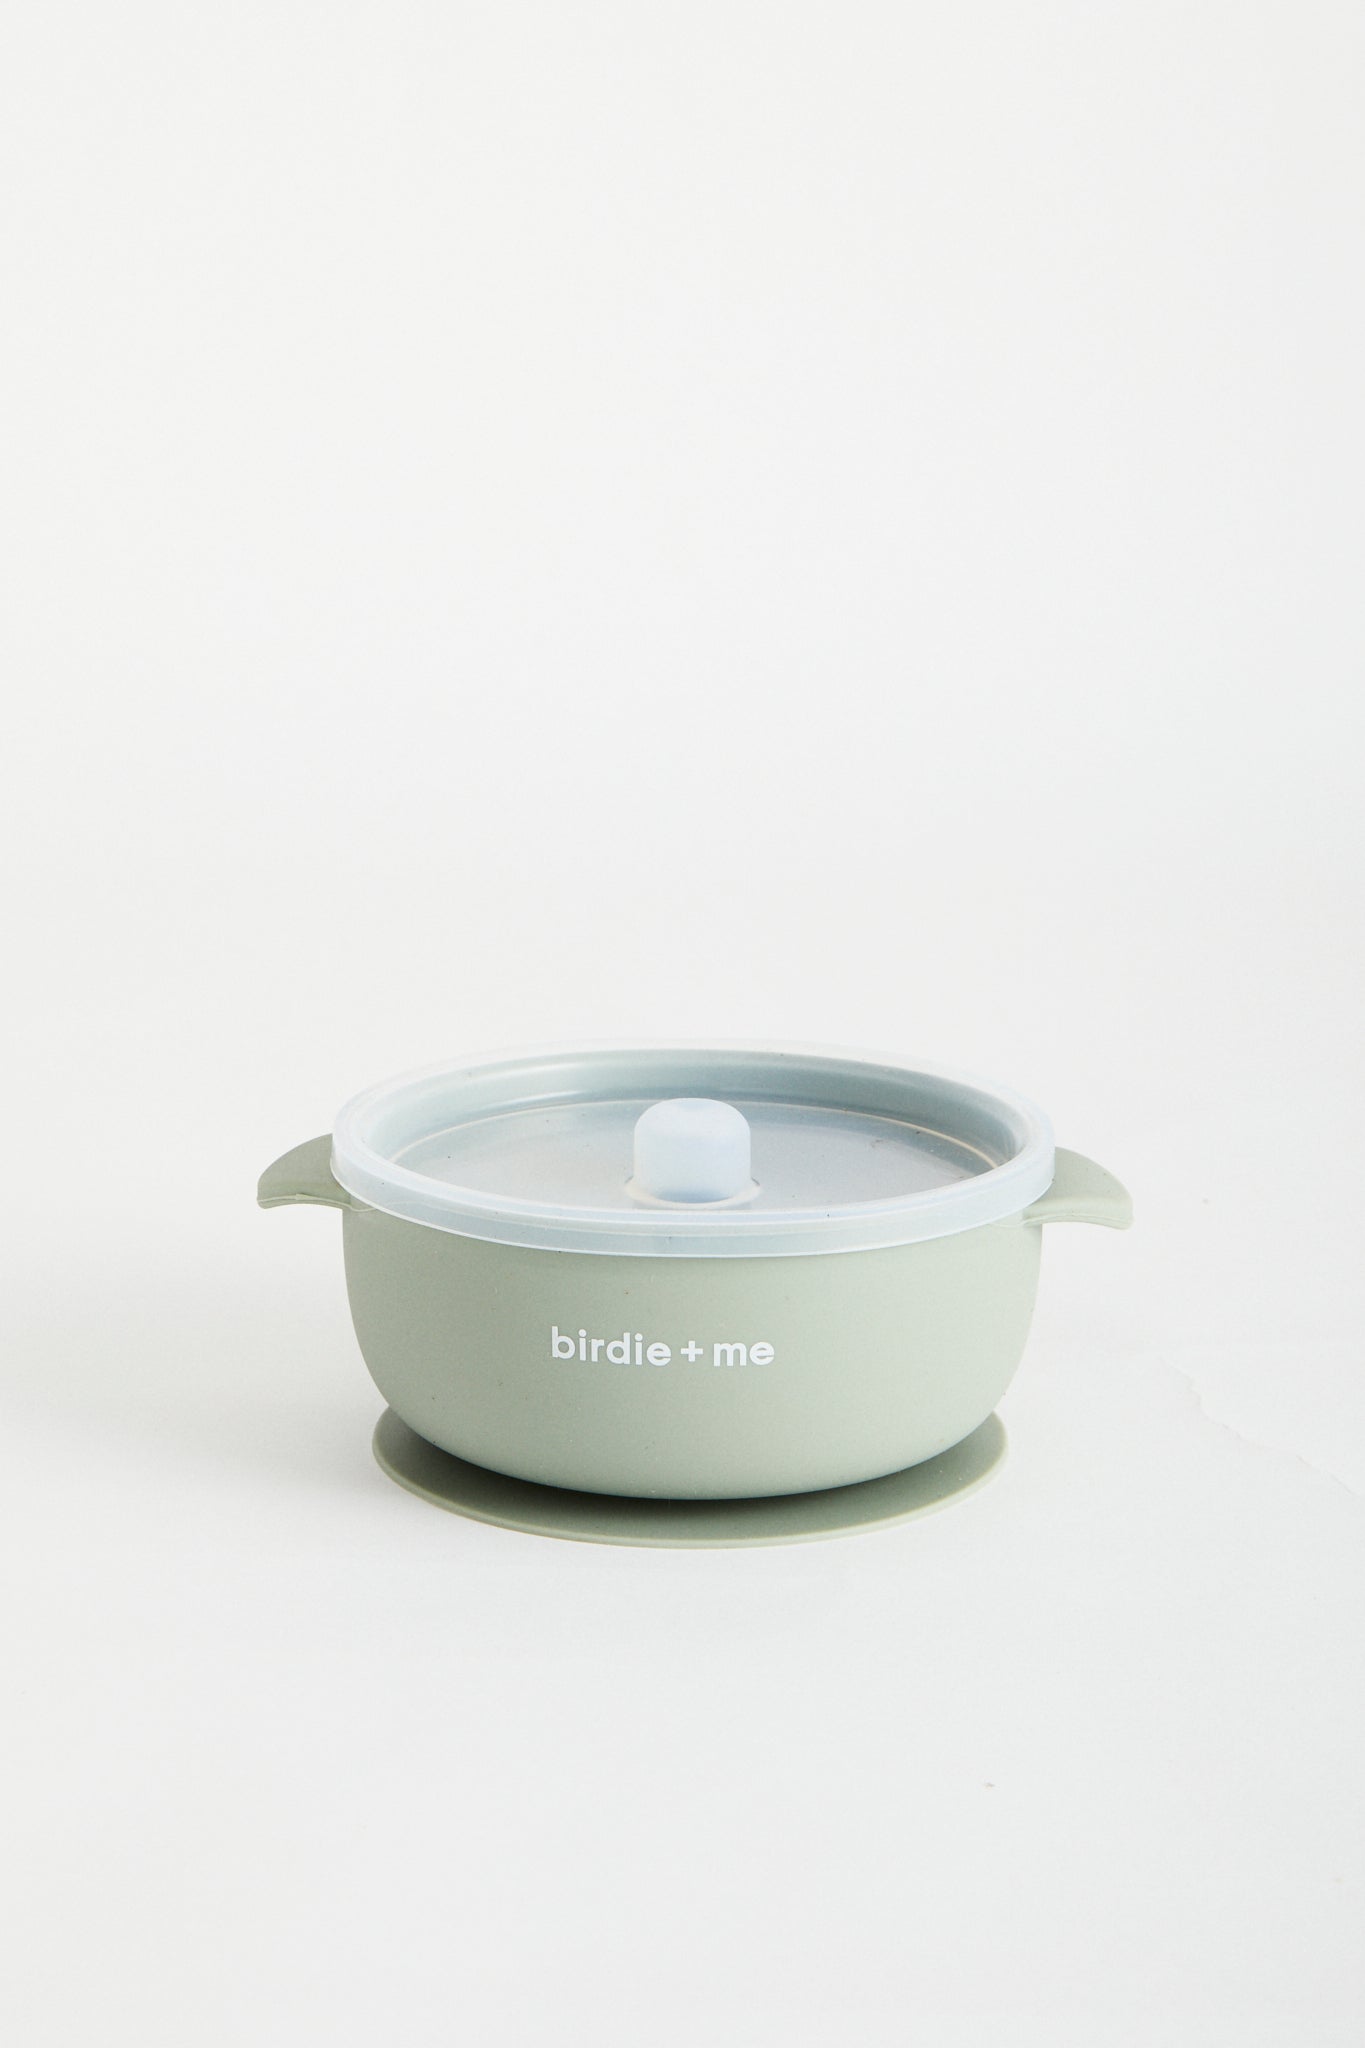 Silicone bowl with suction bottom and lid. Branded with birdie + me logo.